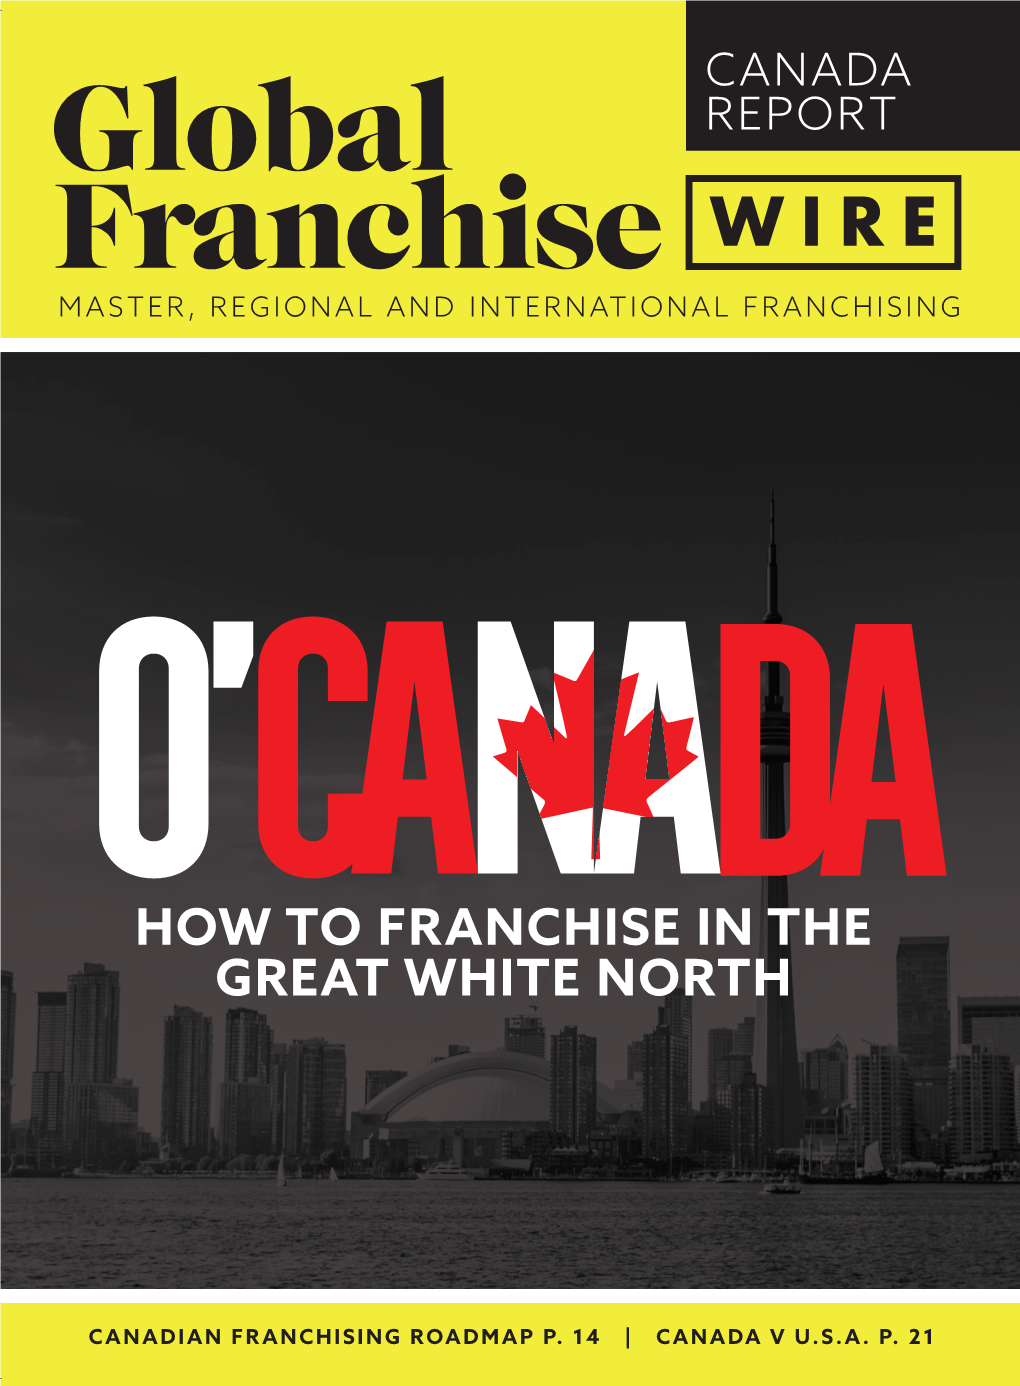 How to Franchise in the Great White North